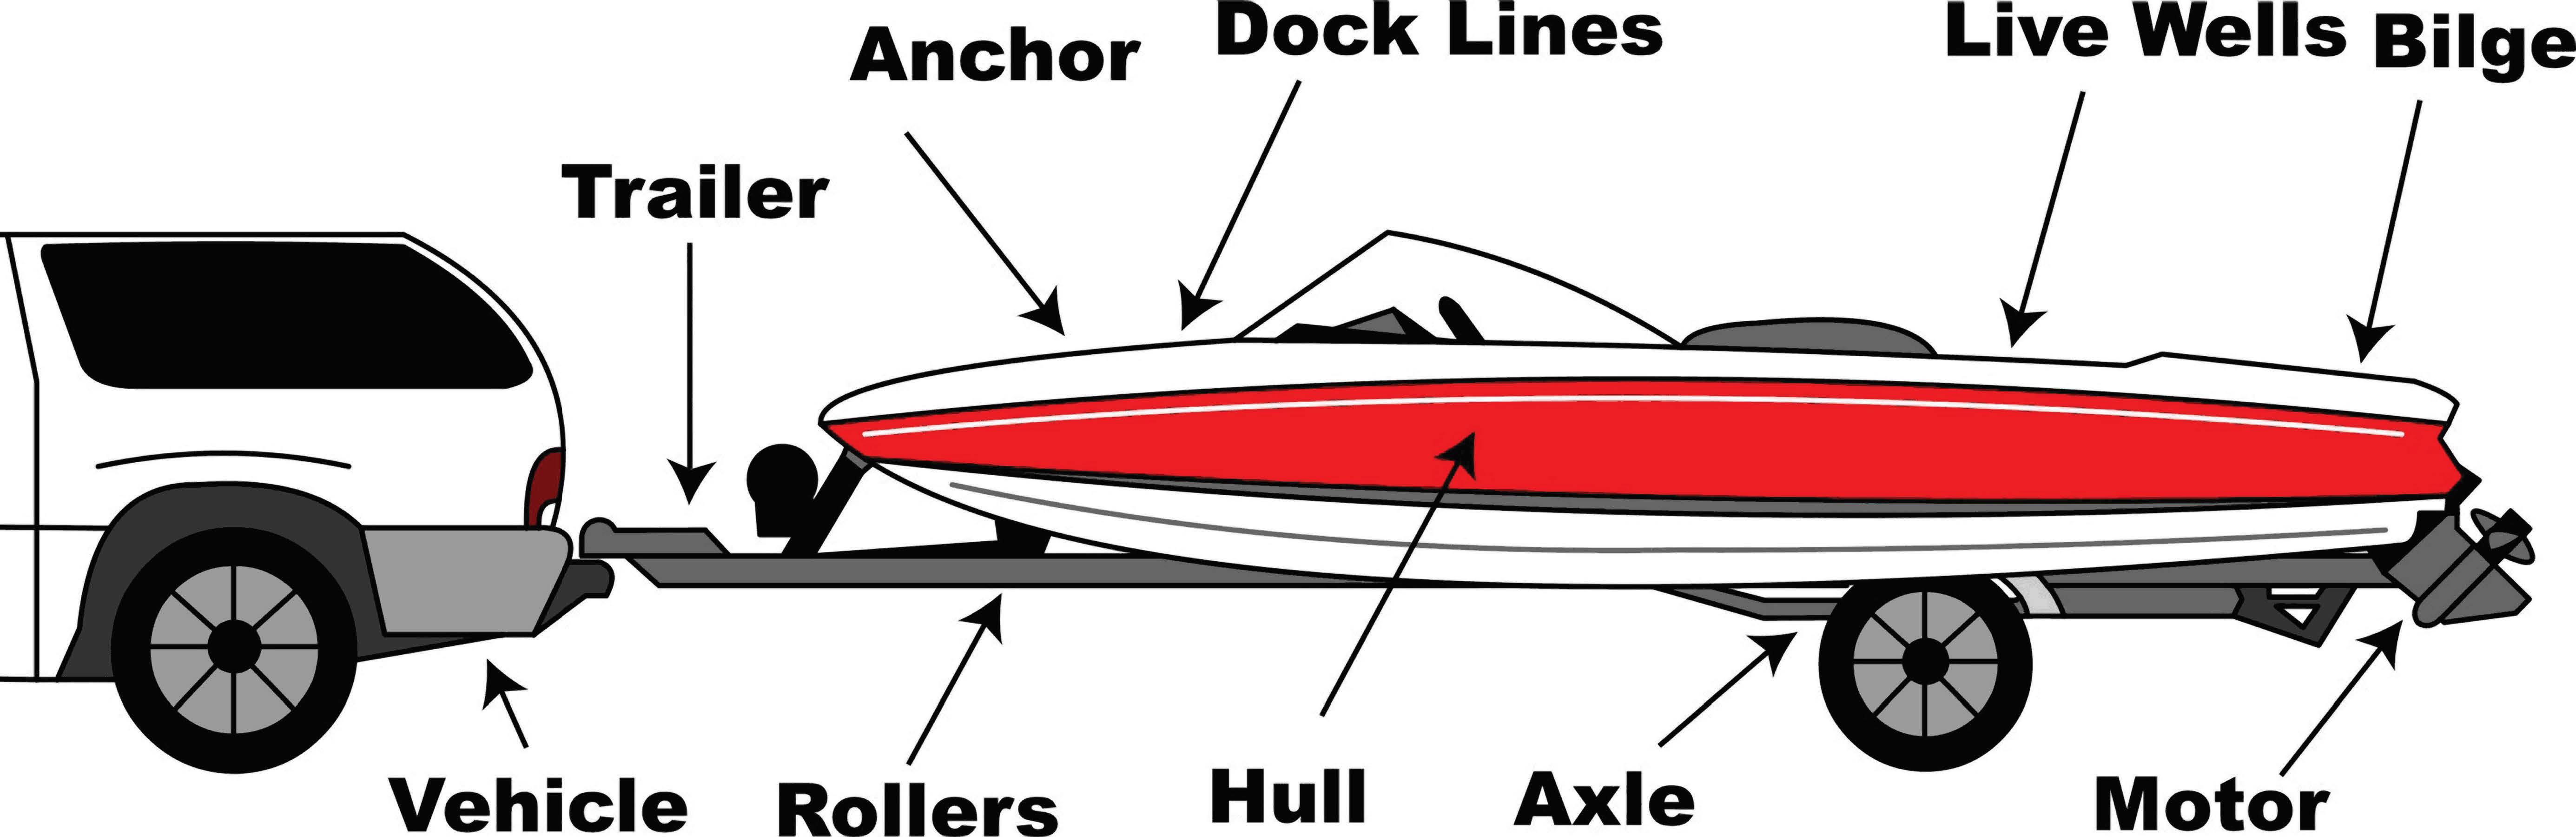 Inspection points on boats for AIS